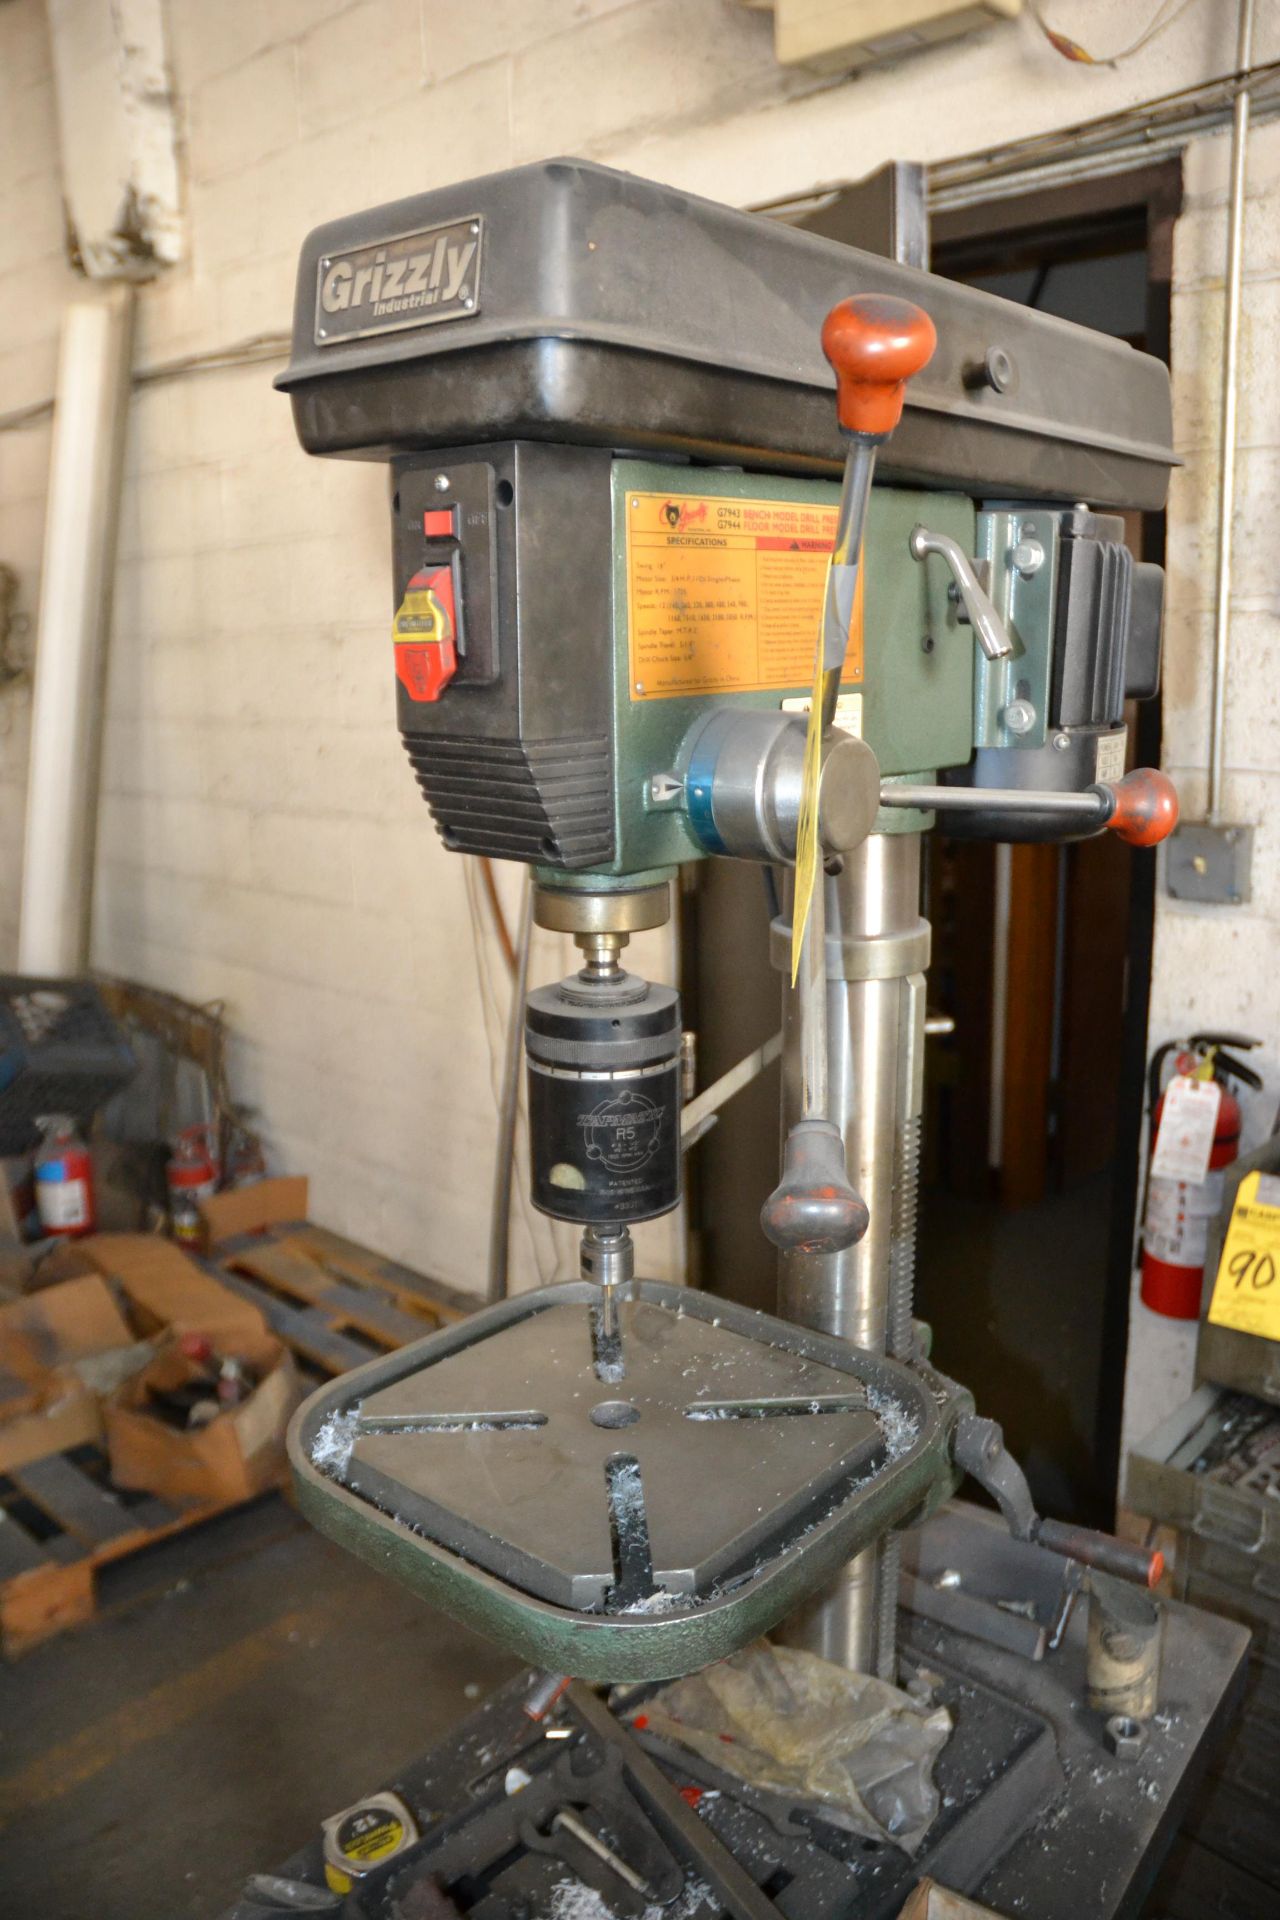 14" Grizzly Bench Top Drill Press, G7943 with R5 Rapmatic Tapping Head